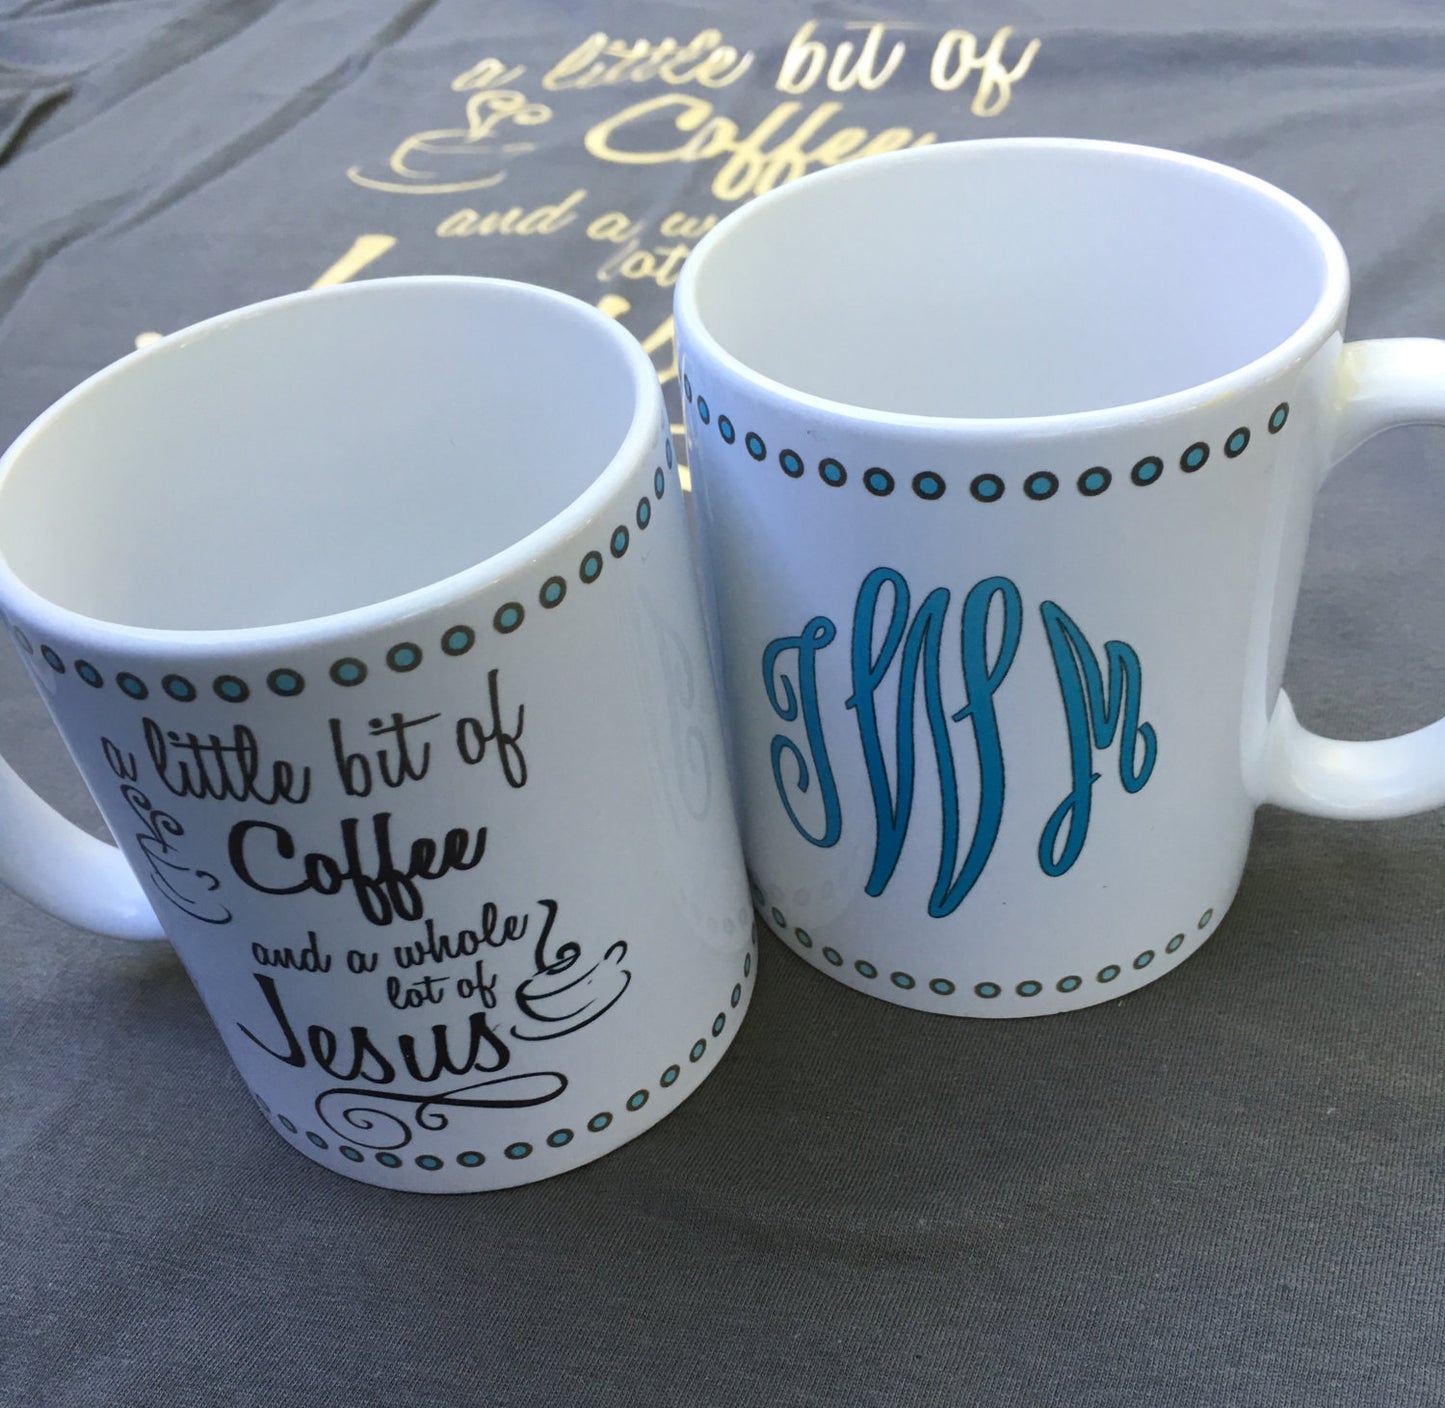 personalized coffee mug, a little bit of coffee and a whole lot of jesus